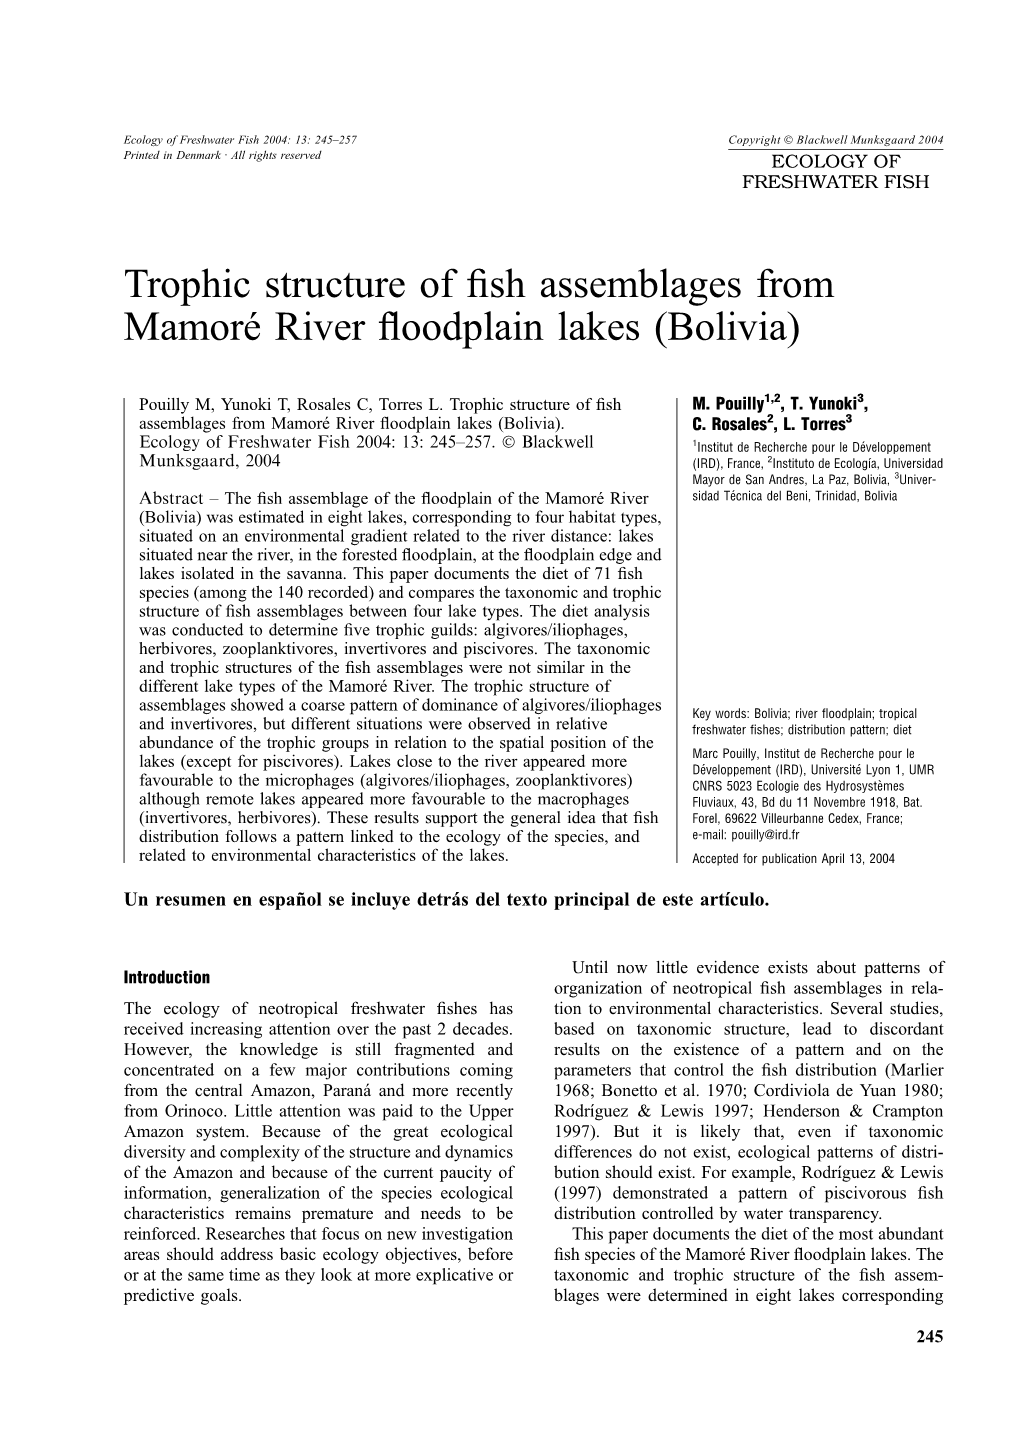 Trophic Structure of Fish Assemblages from Mamore´ River Floodplain Lakes